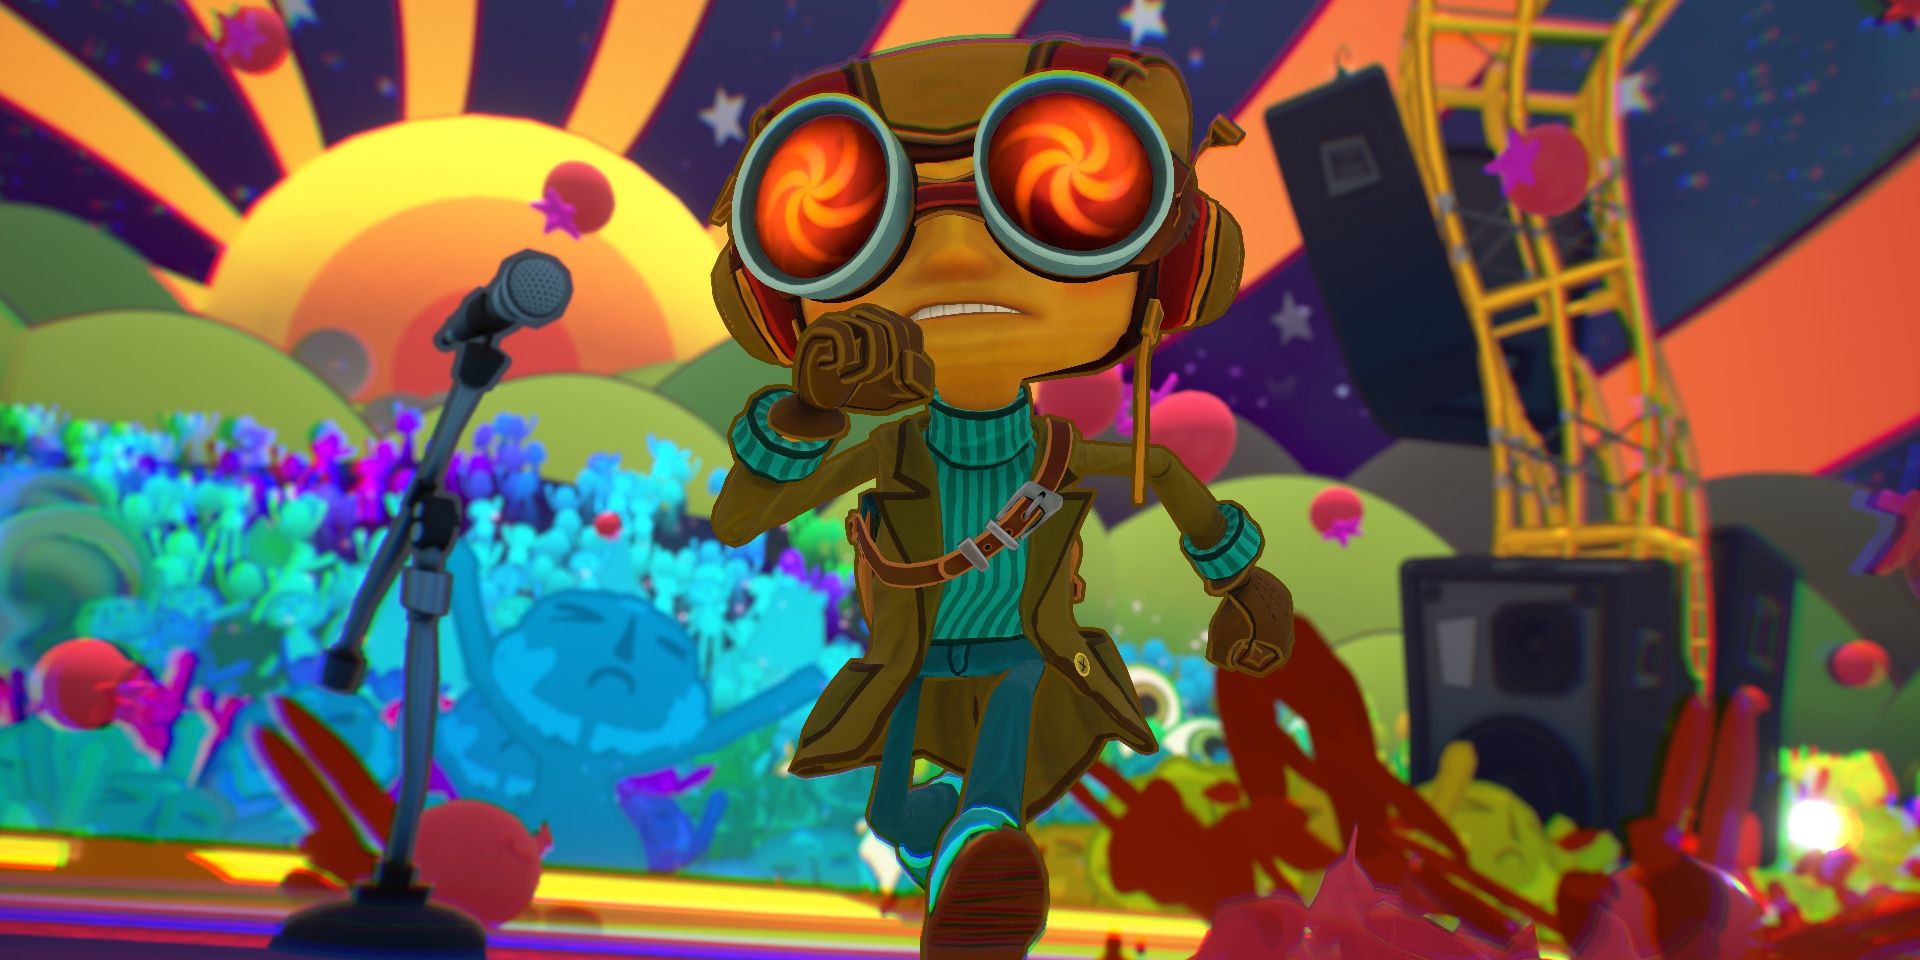 Raz running on a stage with fans cheering in the background in Psychonauts 2